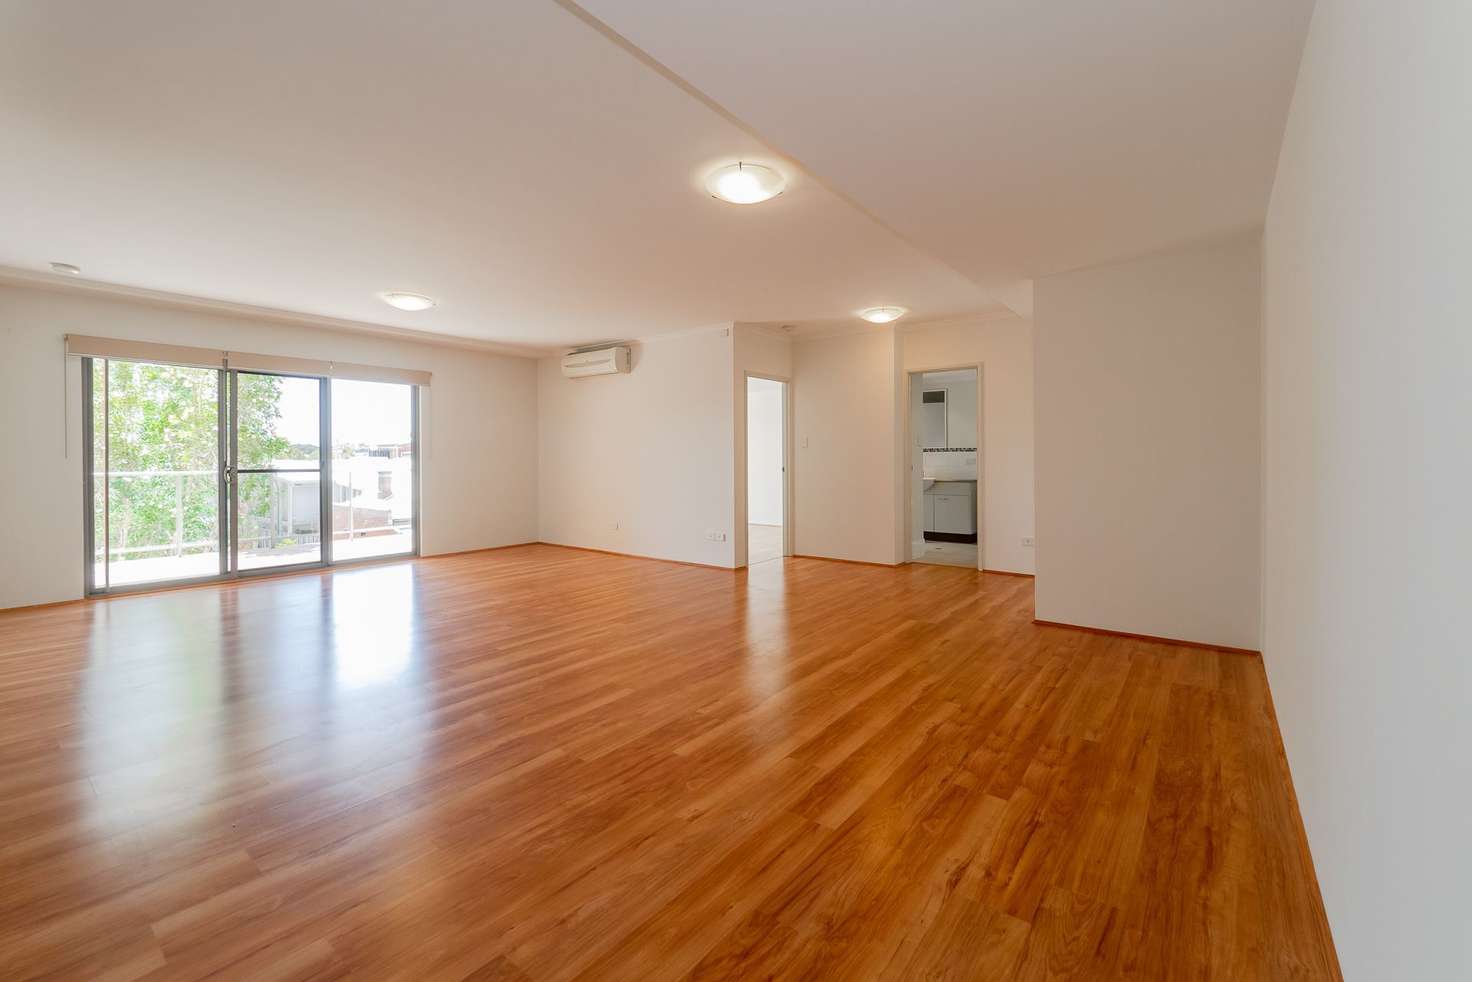 Main view of Homely apartment listing, 54/154 Newcastle Street, Perth WA 6000